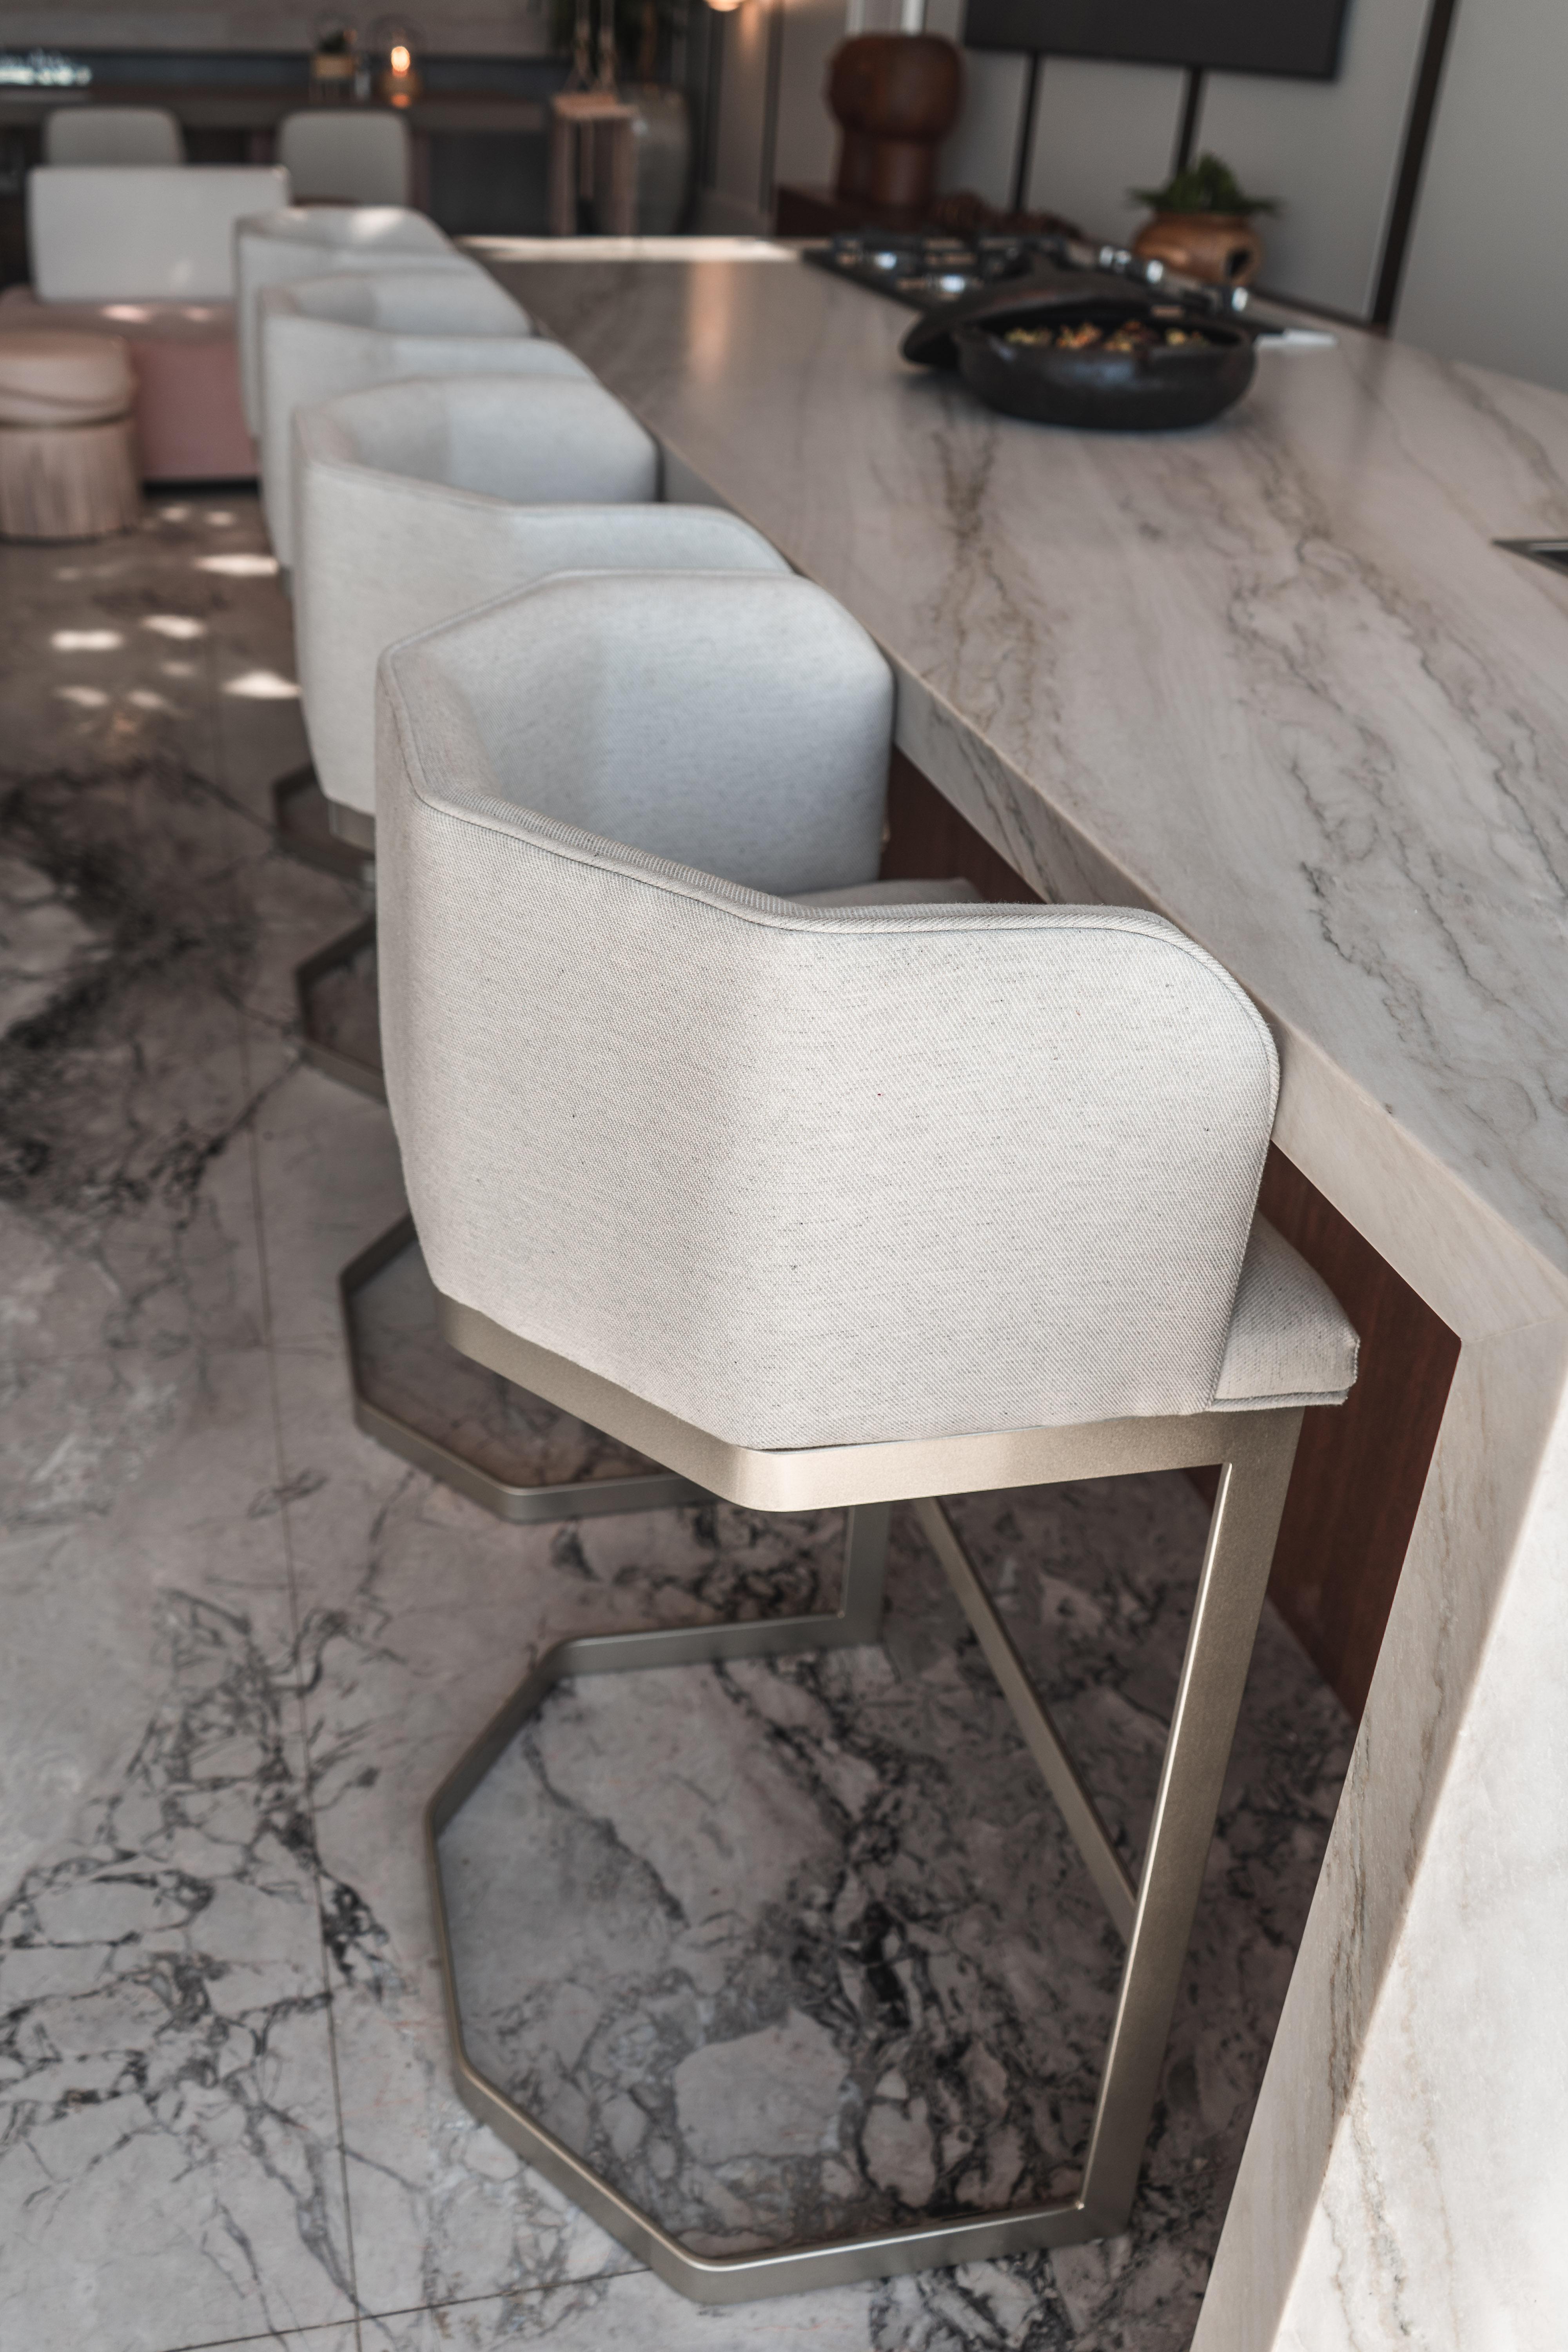 Brazilian Set of 4 Stools Upholstered in Linen Fabric in Champagne Colored Metallic Feet For Sale